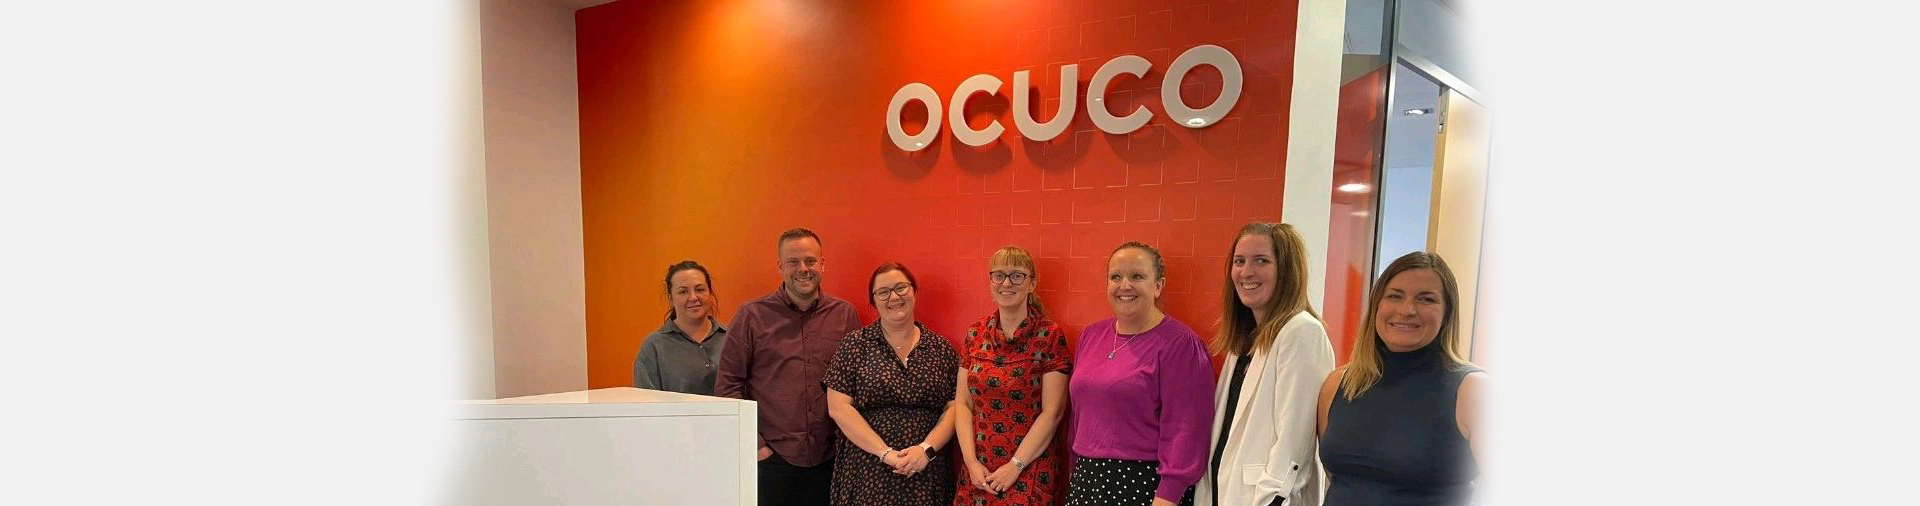 Ocuco and Asda: A Strategic Partnership for OmniChannel Eyecare Excellence